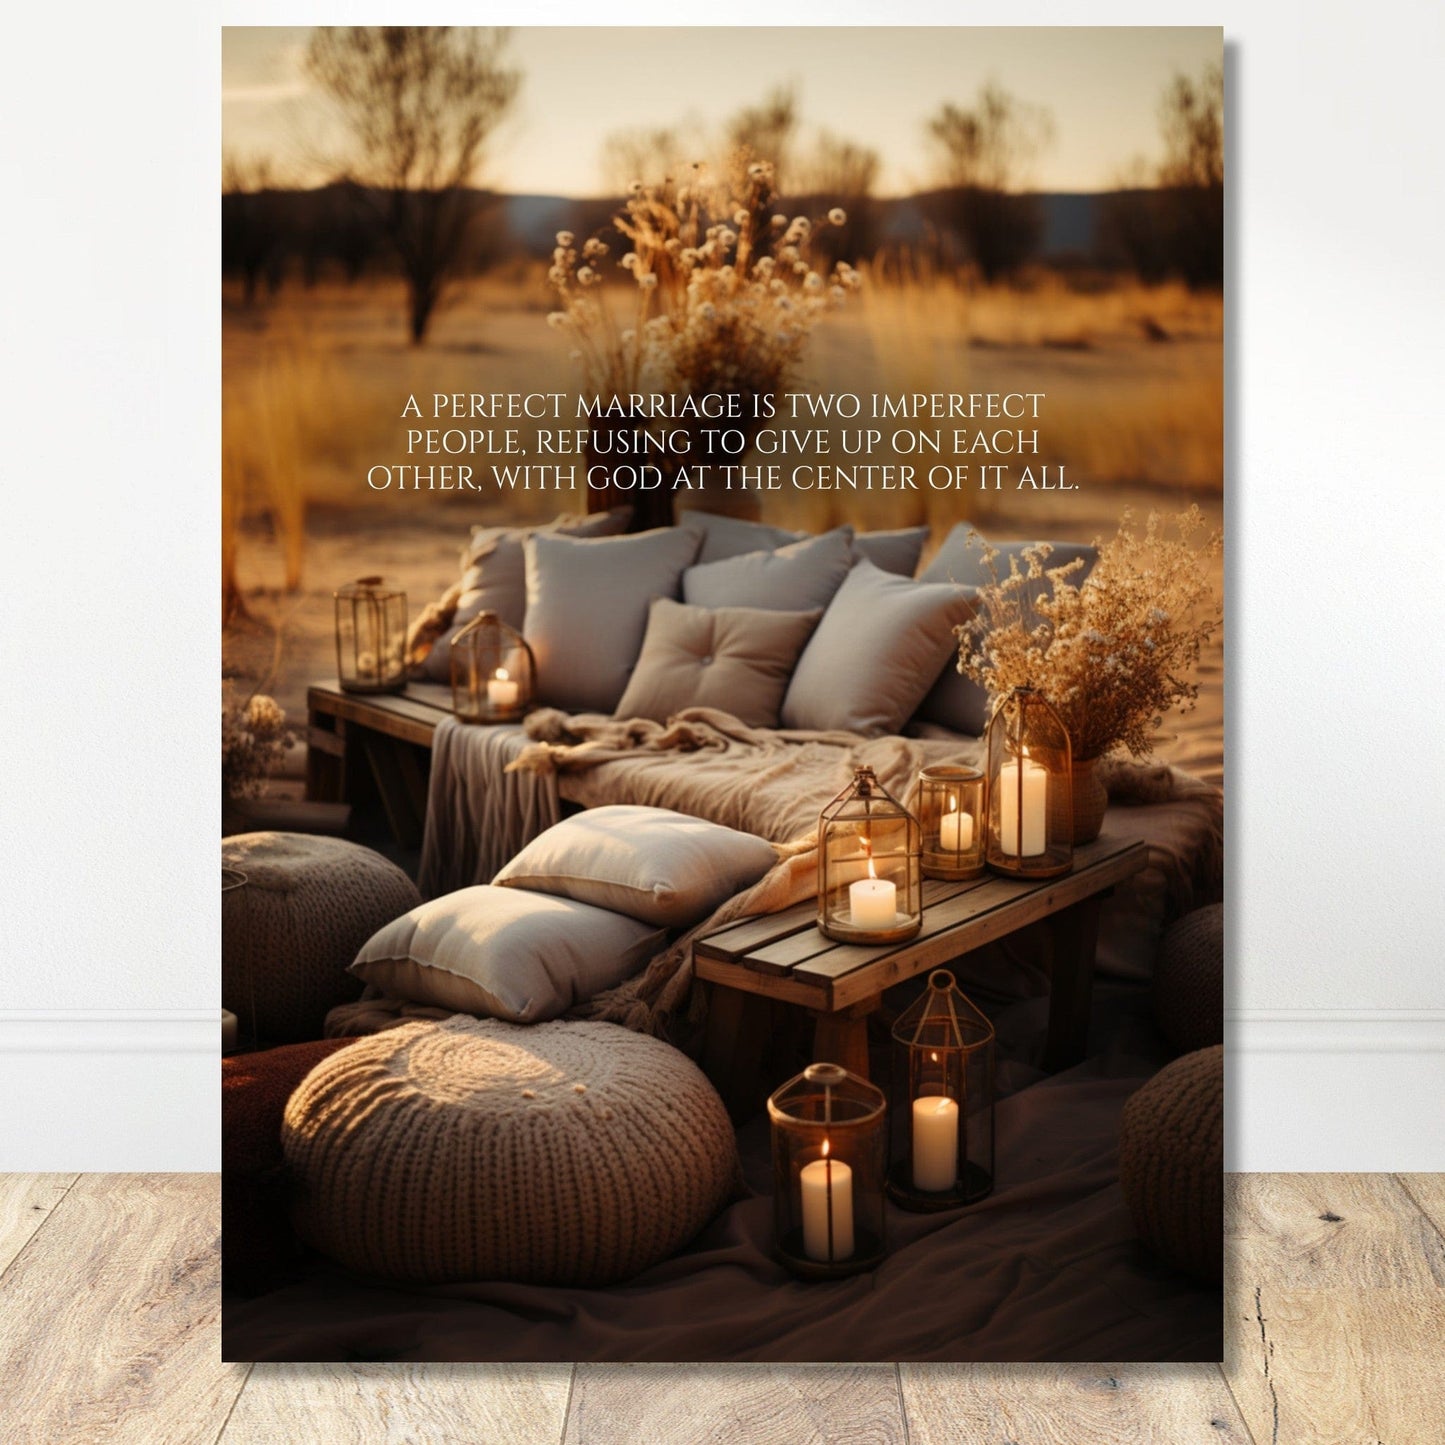 Coffee With My Father Print Material 30x40 cm / 12x16″ / Unframed / Unframed - Poster Only God-Centered Marriage - Custom Art